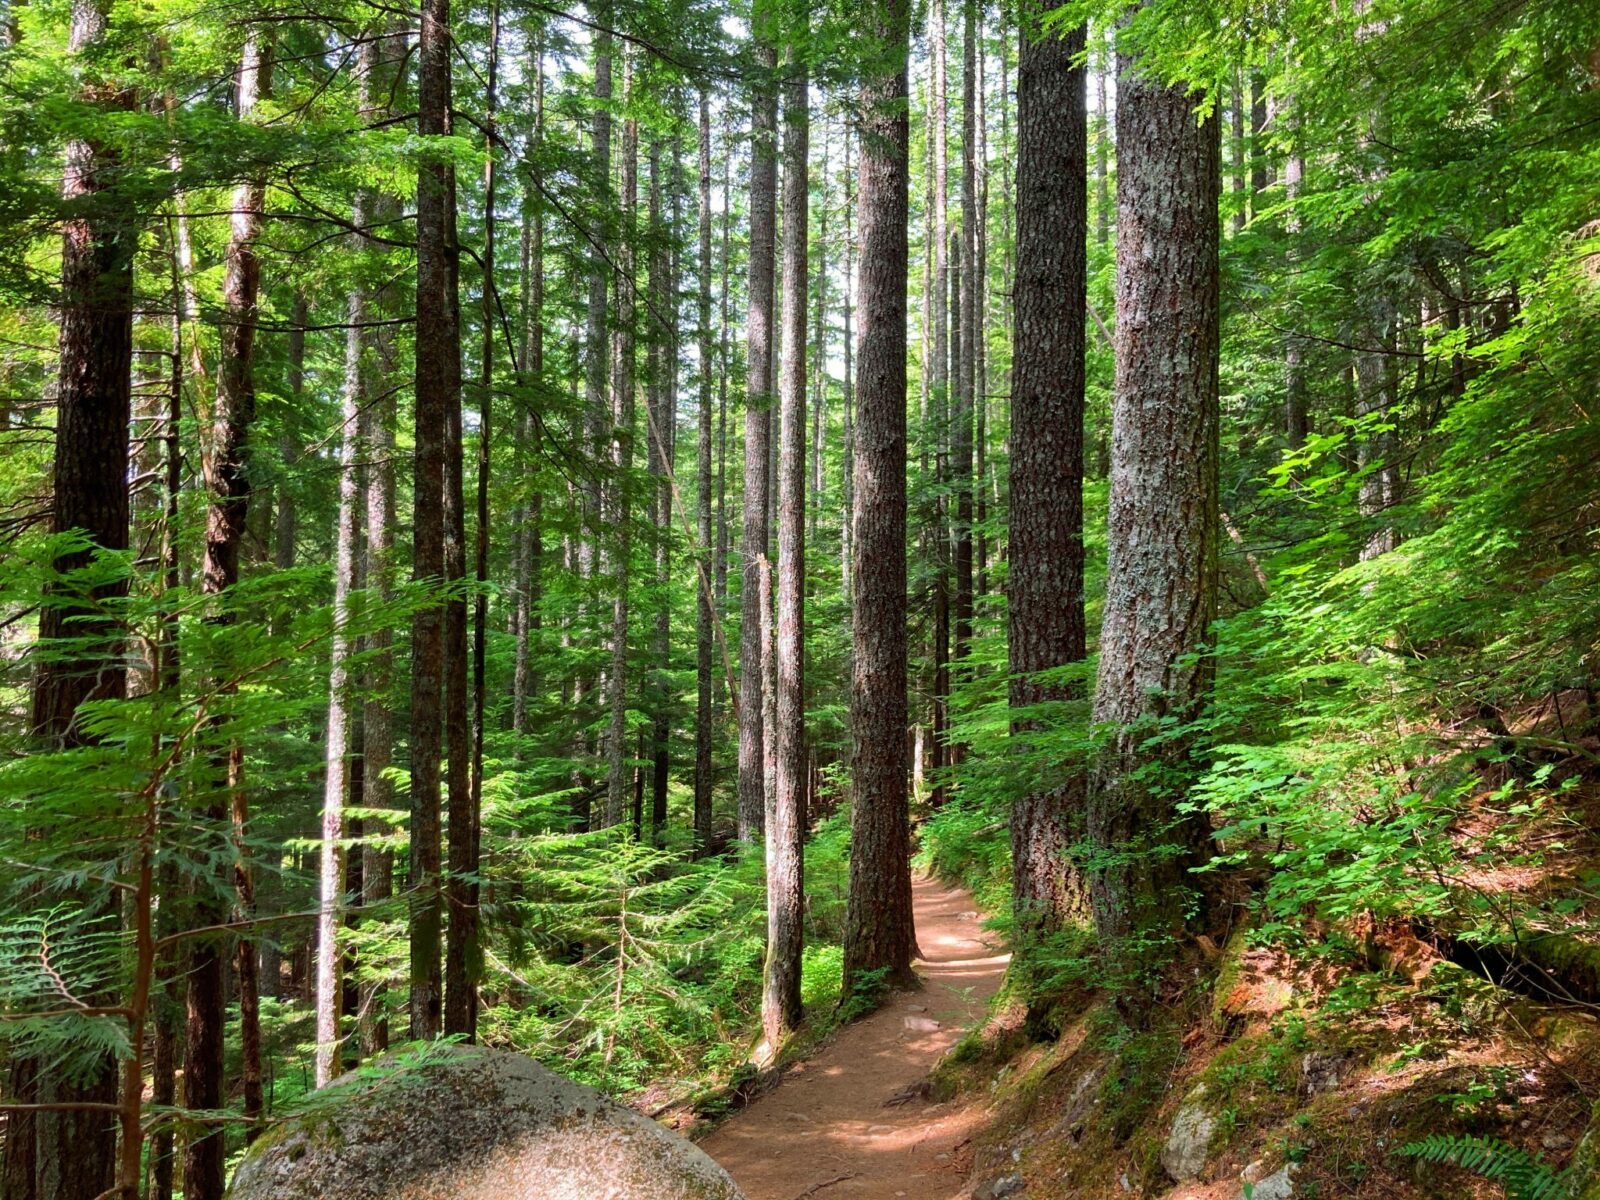 A green forest along the Annette Lake trail. There is a dirt trail going between the trees and a large boulder on the left side of the trail in the trees.